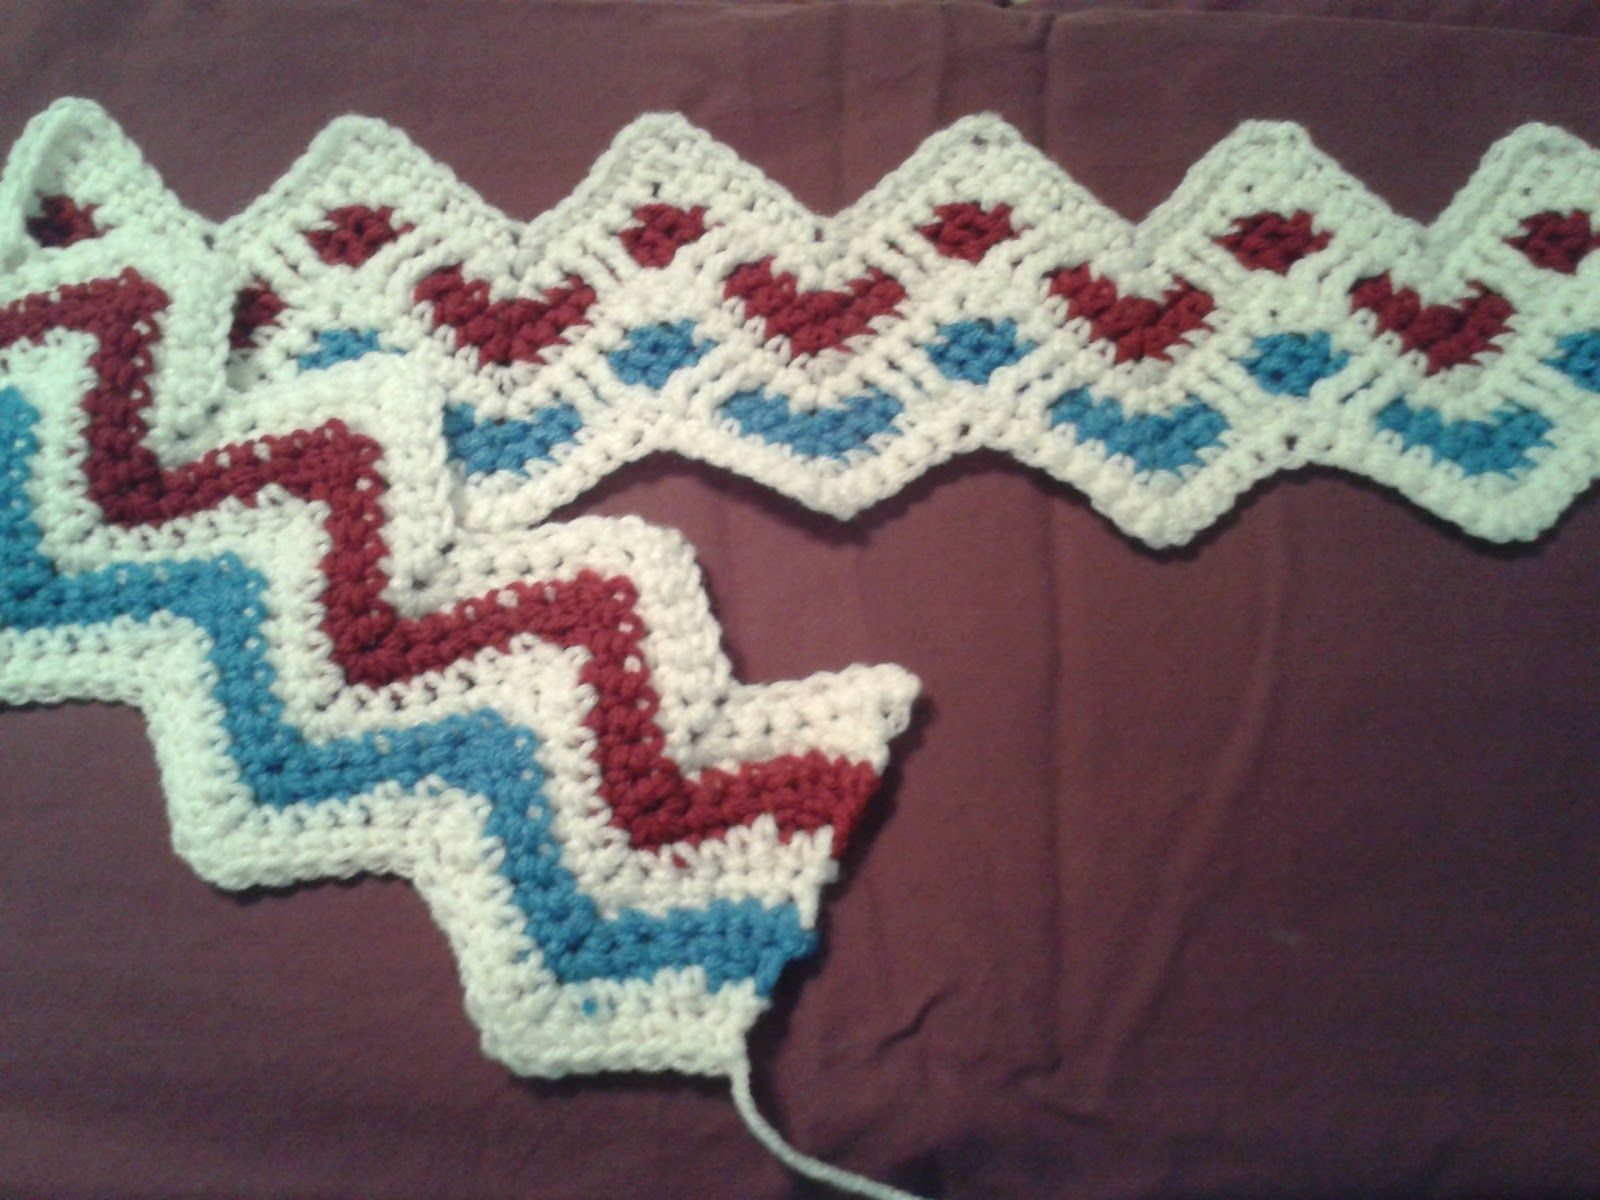 Crochet Ripple Afghan Patterns Sweetheart Ripple Afghan Pattern Free Google Search Crafts To